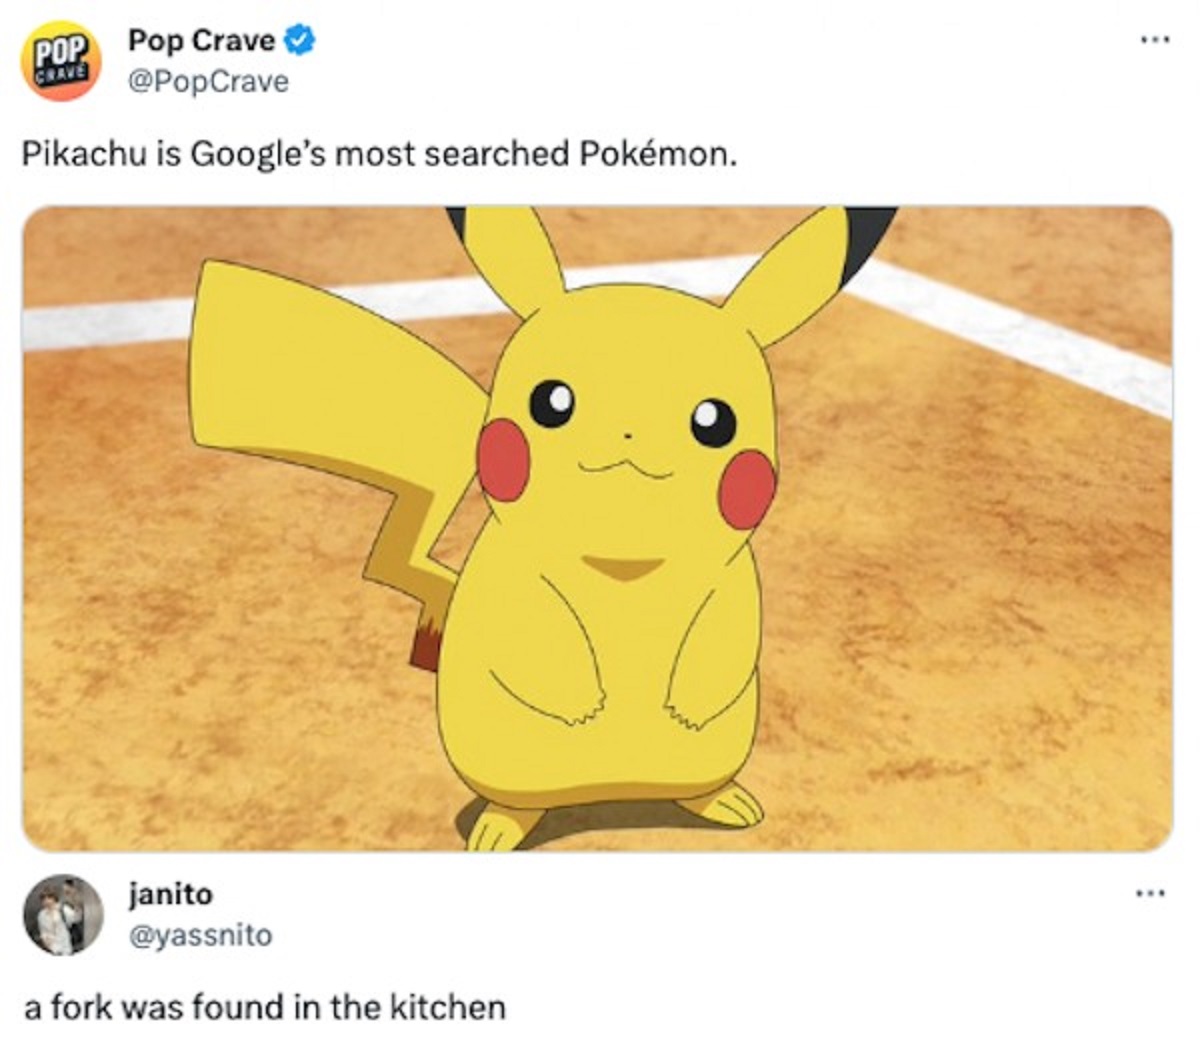 pokemon pikachu - Pop Pop Crave Crave Pikachu is Google's most searched Pokmon. janito a fork was found in the kitchen